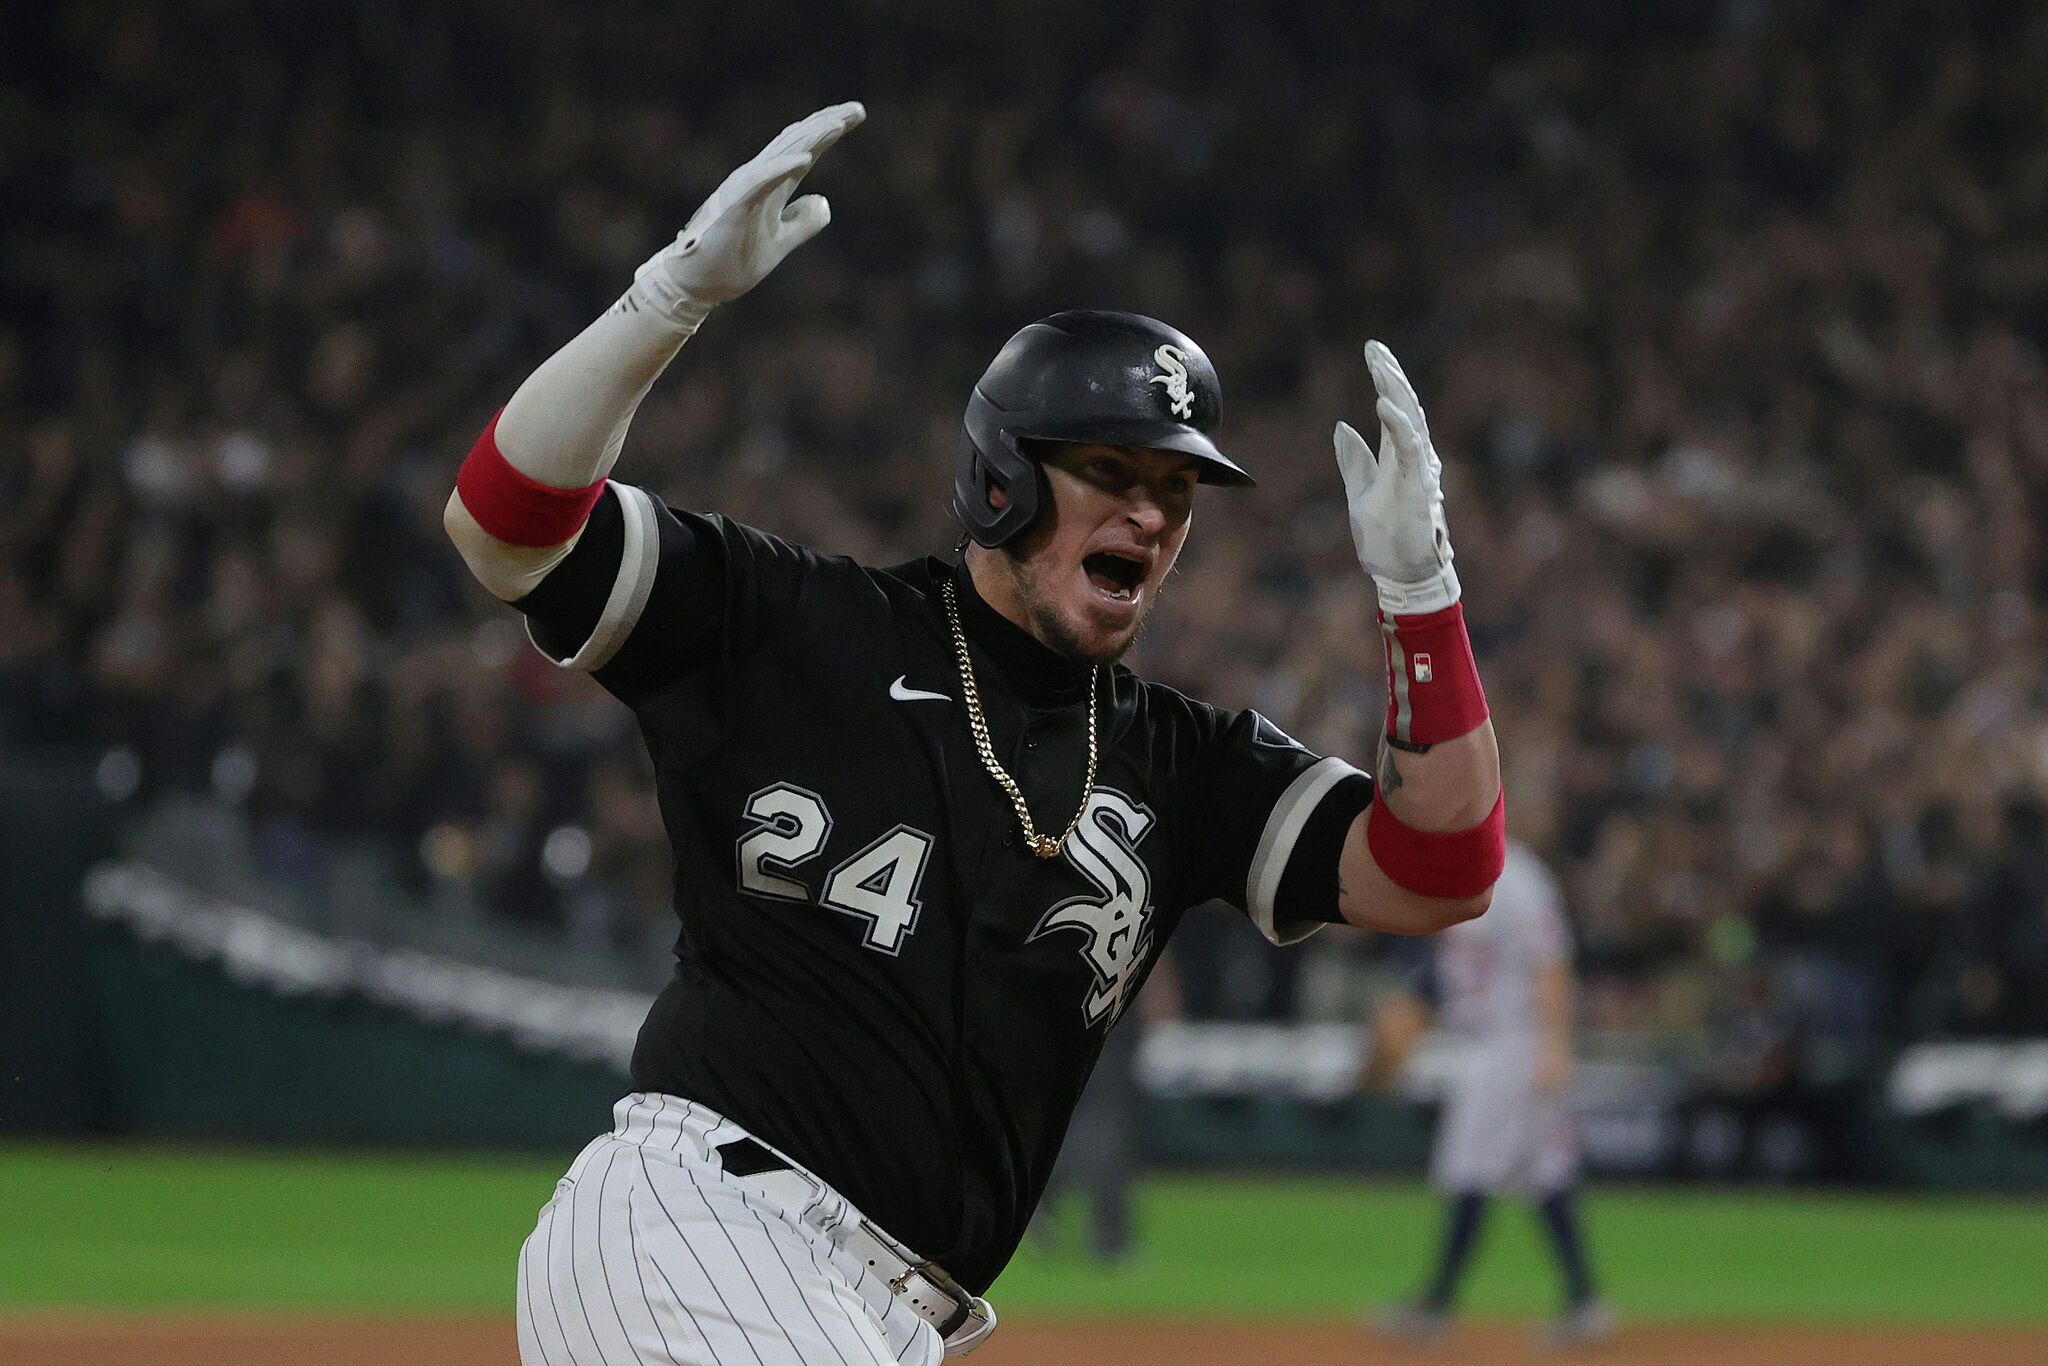 2021 American League Division Series Game 1: White Sox vs. Astros